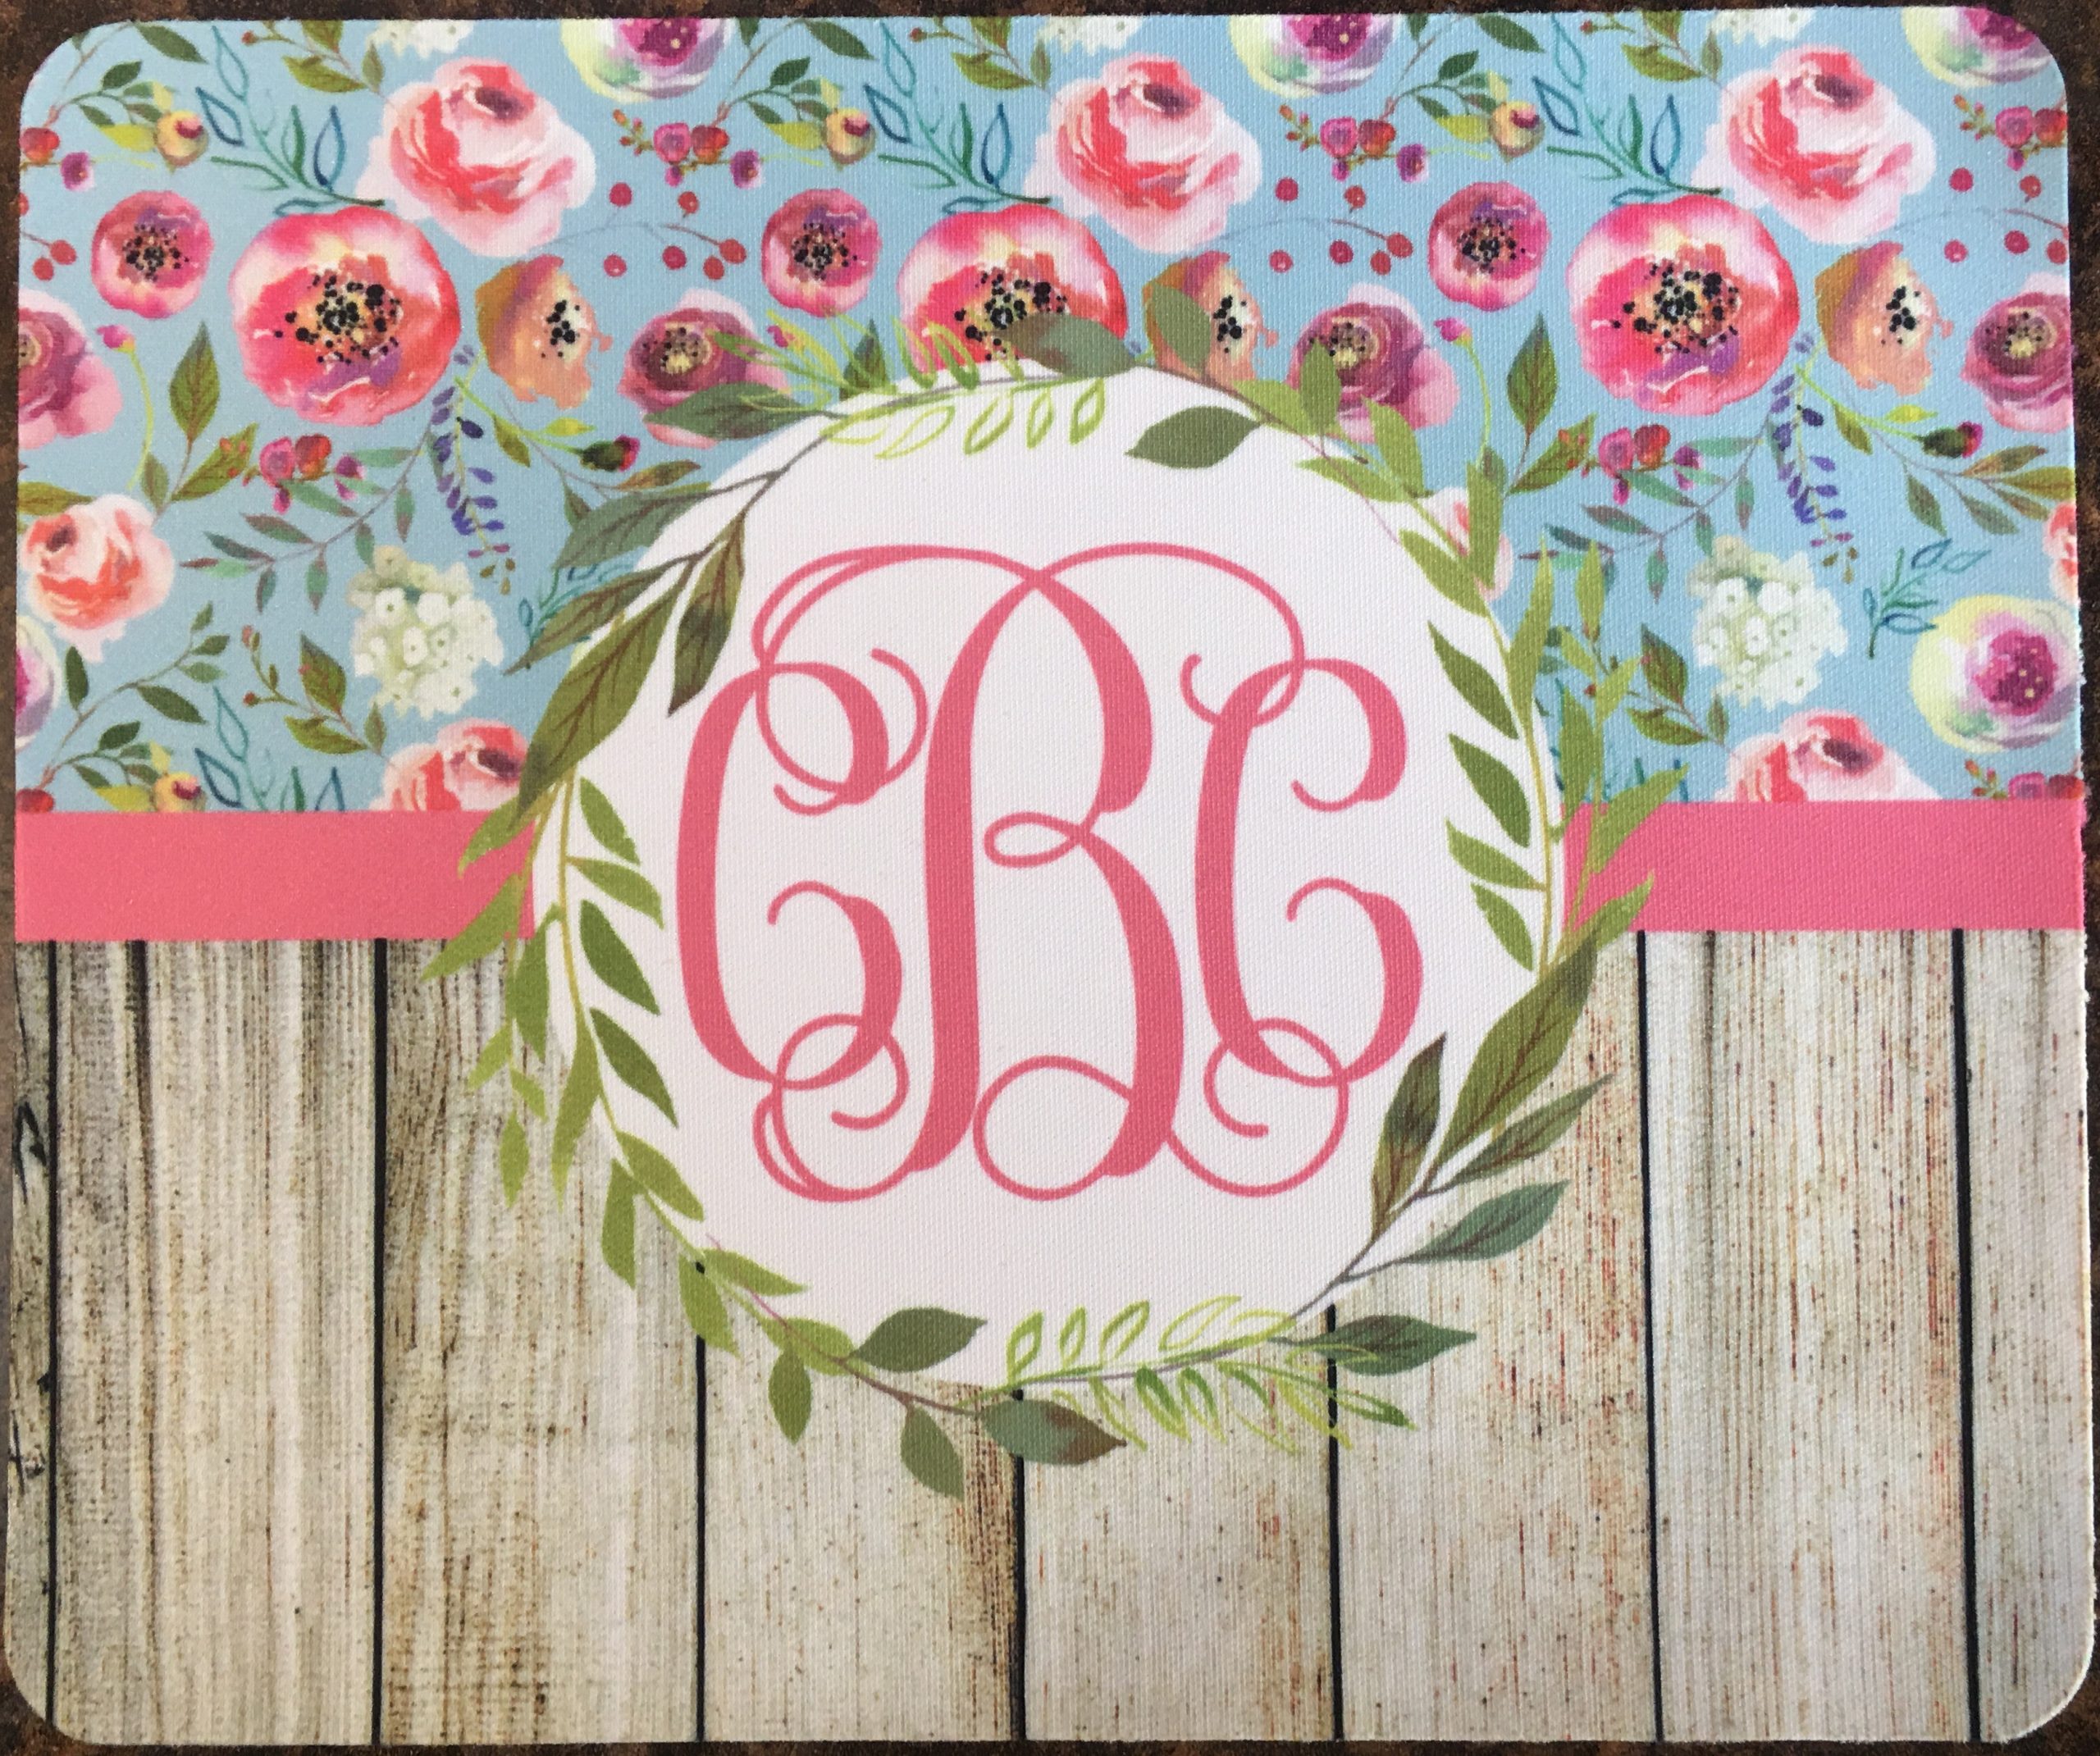 Floral Monogrammed Mouse Pad